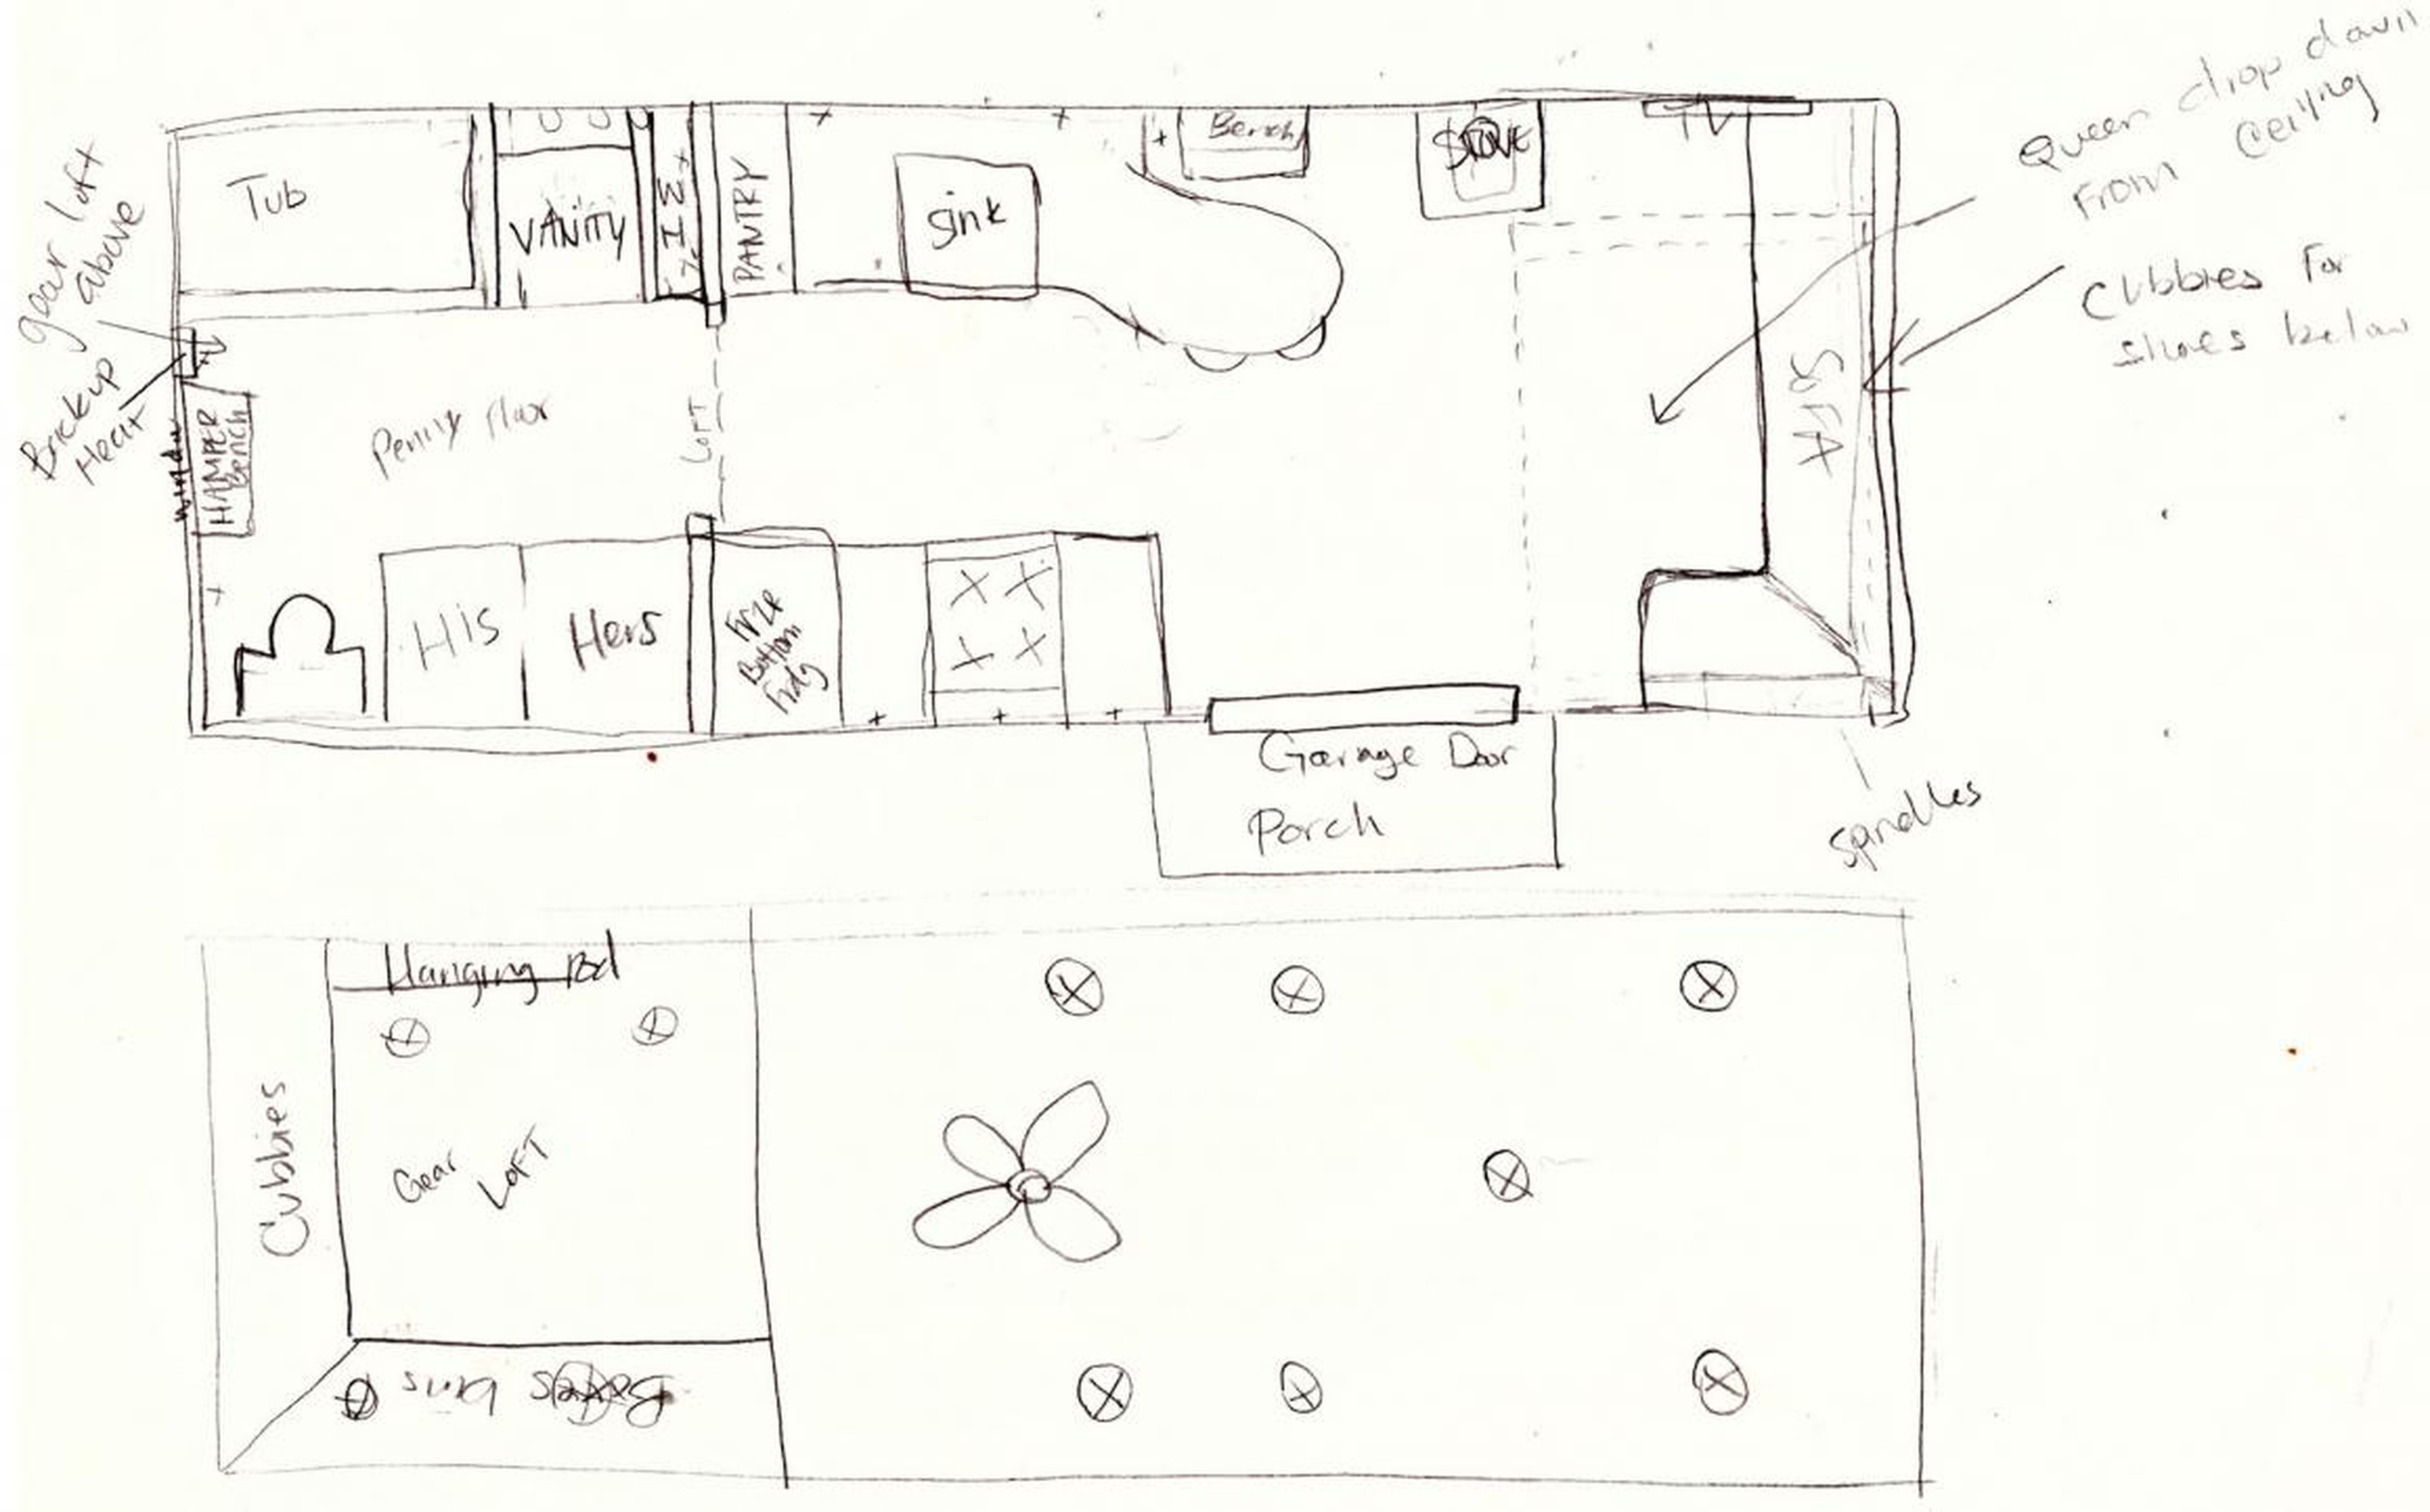 Sometimes customers provide Parham with hand-drawn sketches, links to tiny house builds they like with written descriptions of changes they want made, or detailed 2D- or 3D-computer generated plans.